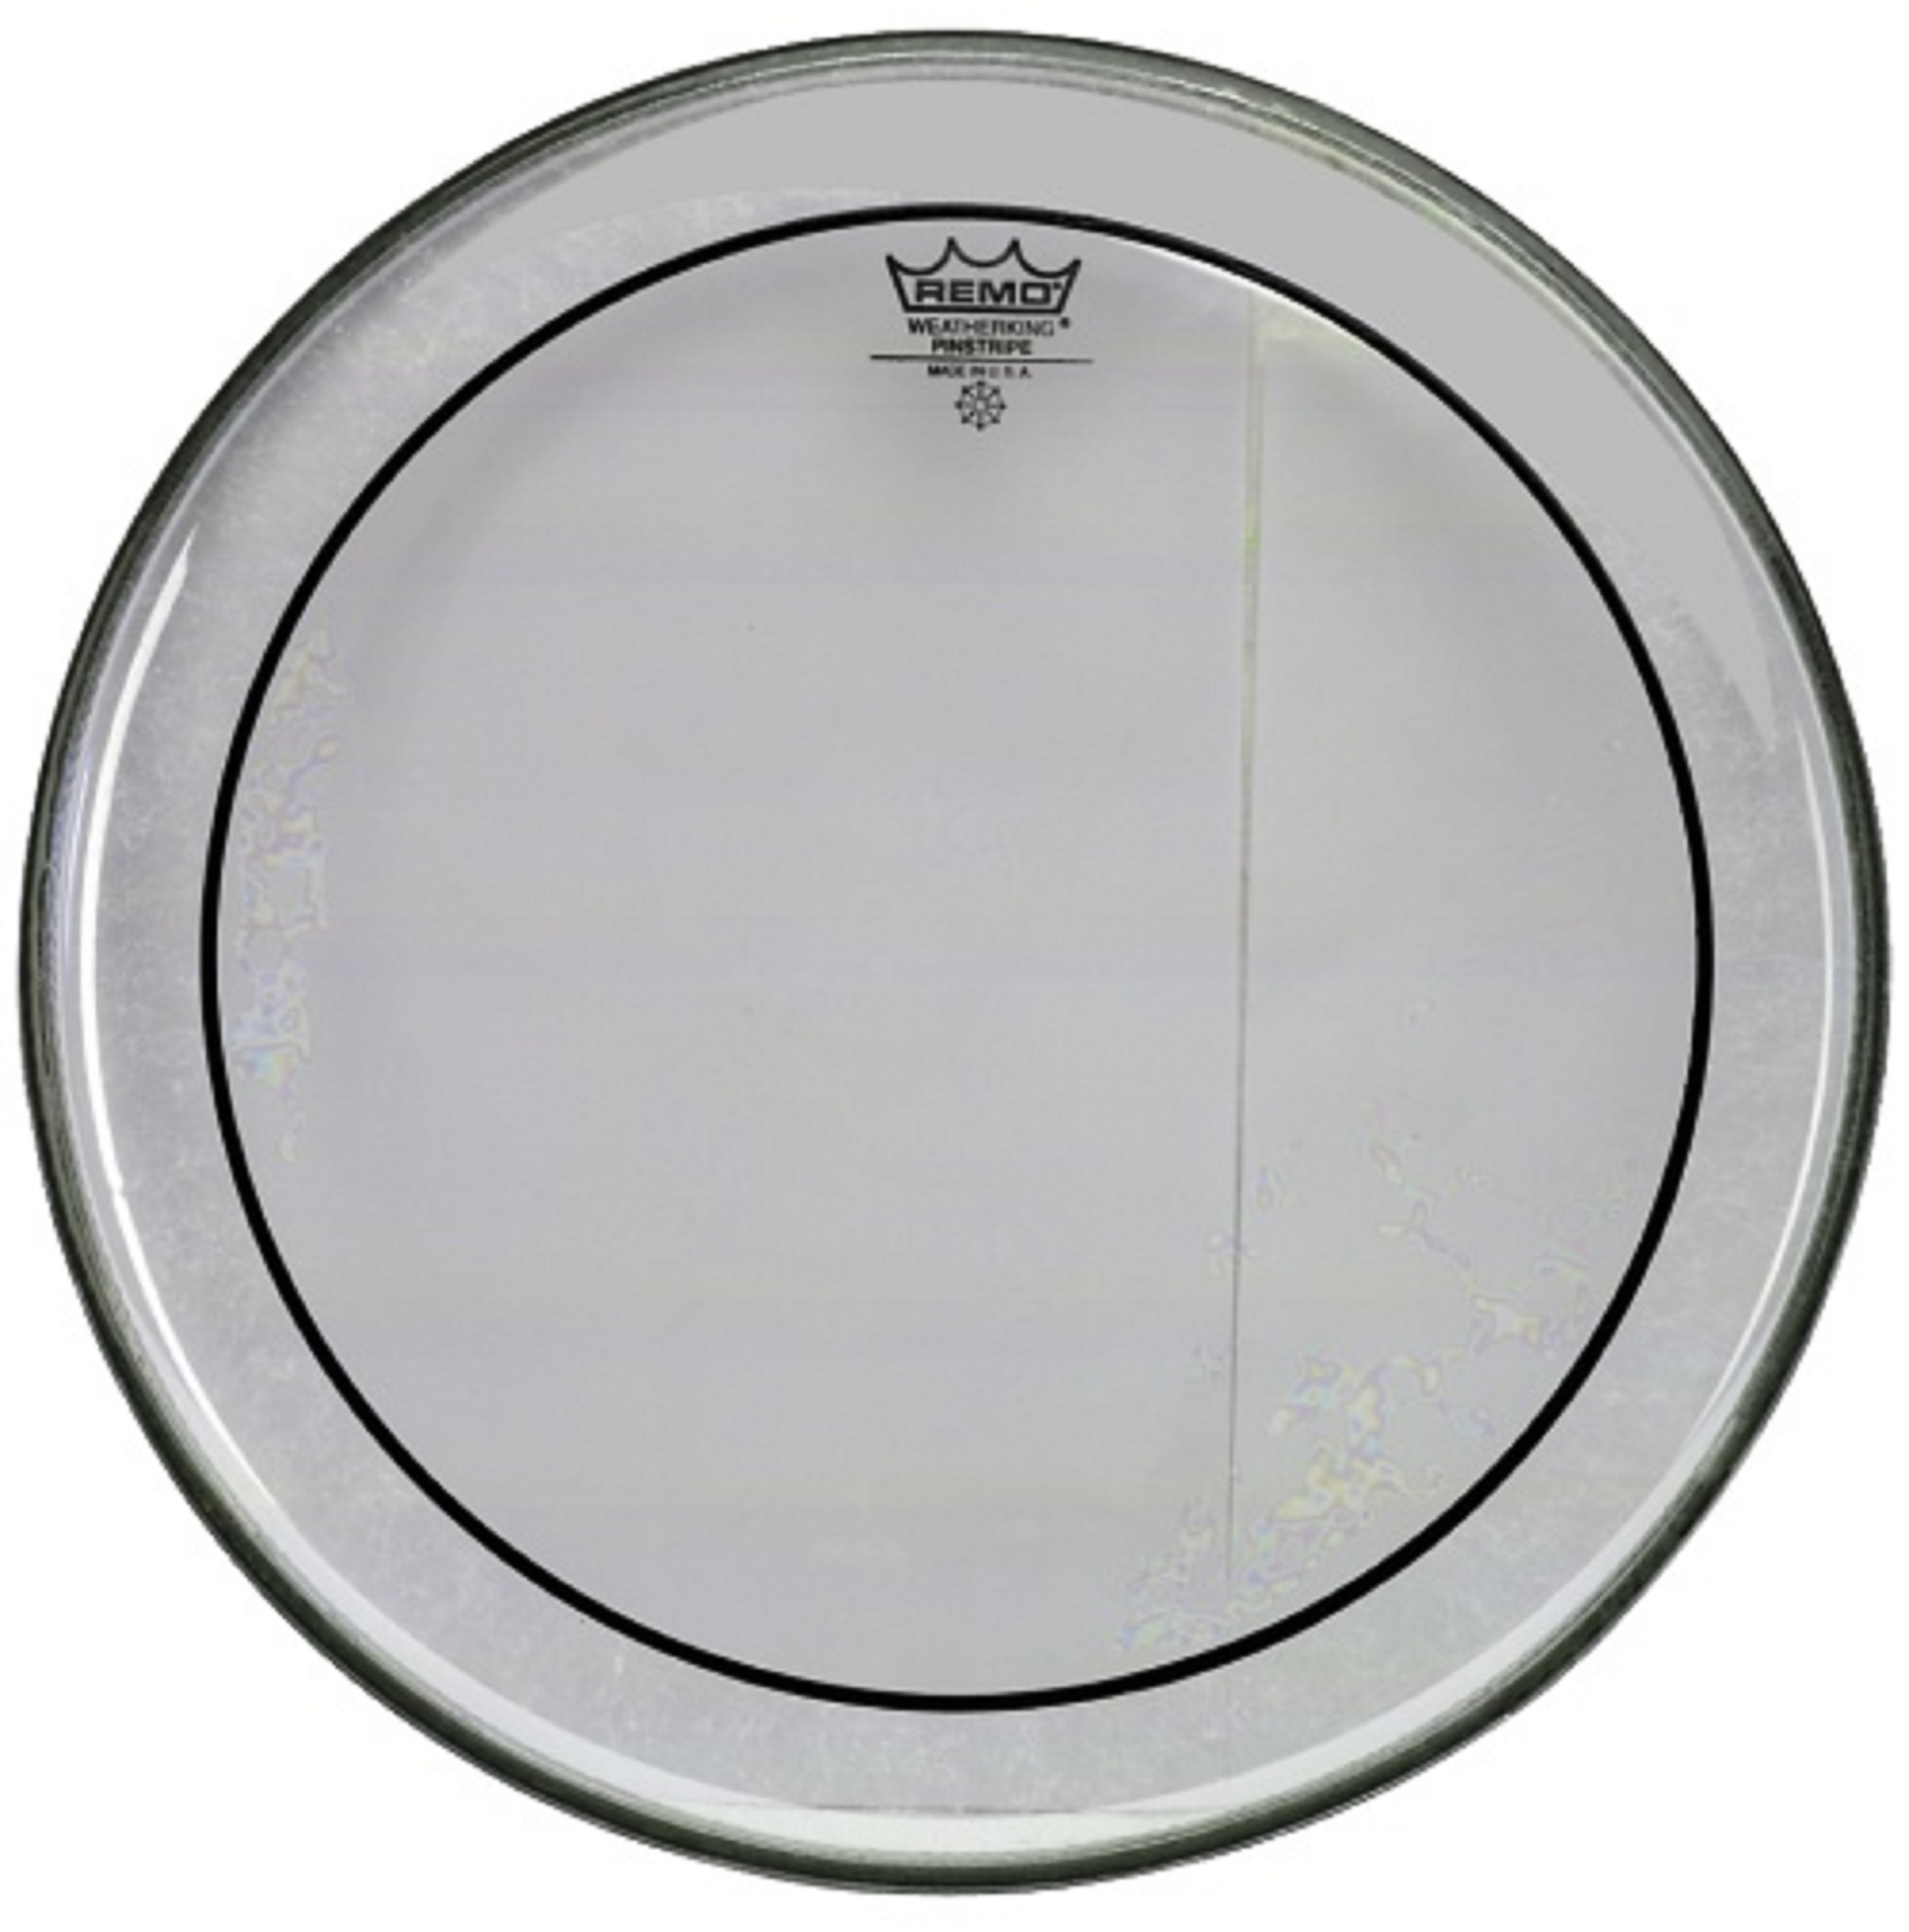 Remo Fell Pinstripe 14" Clear